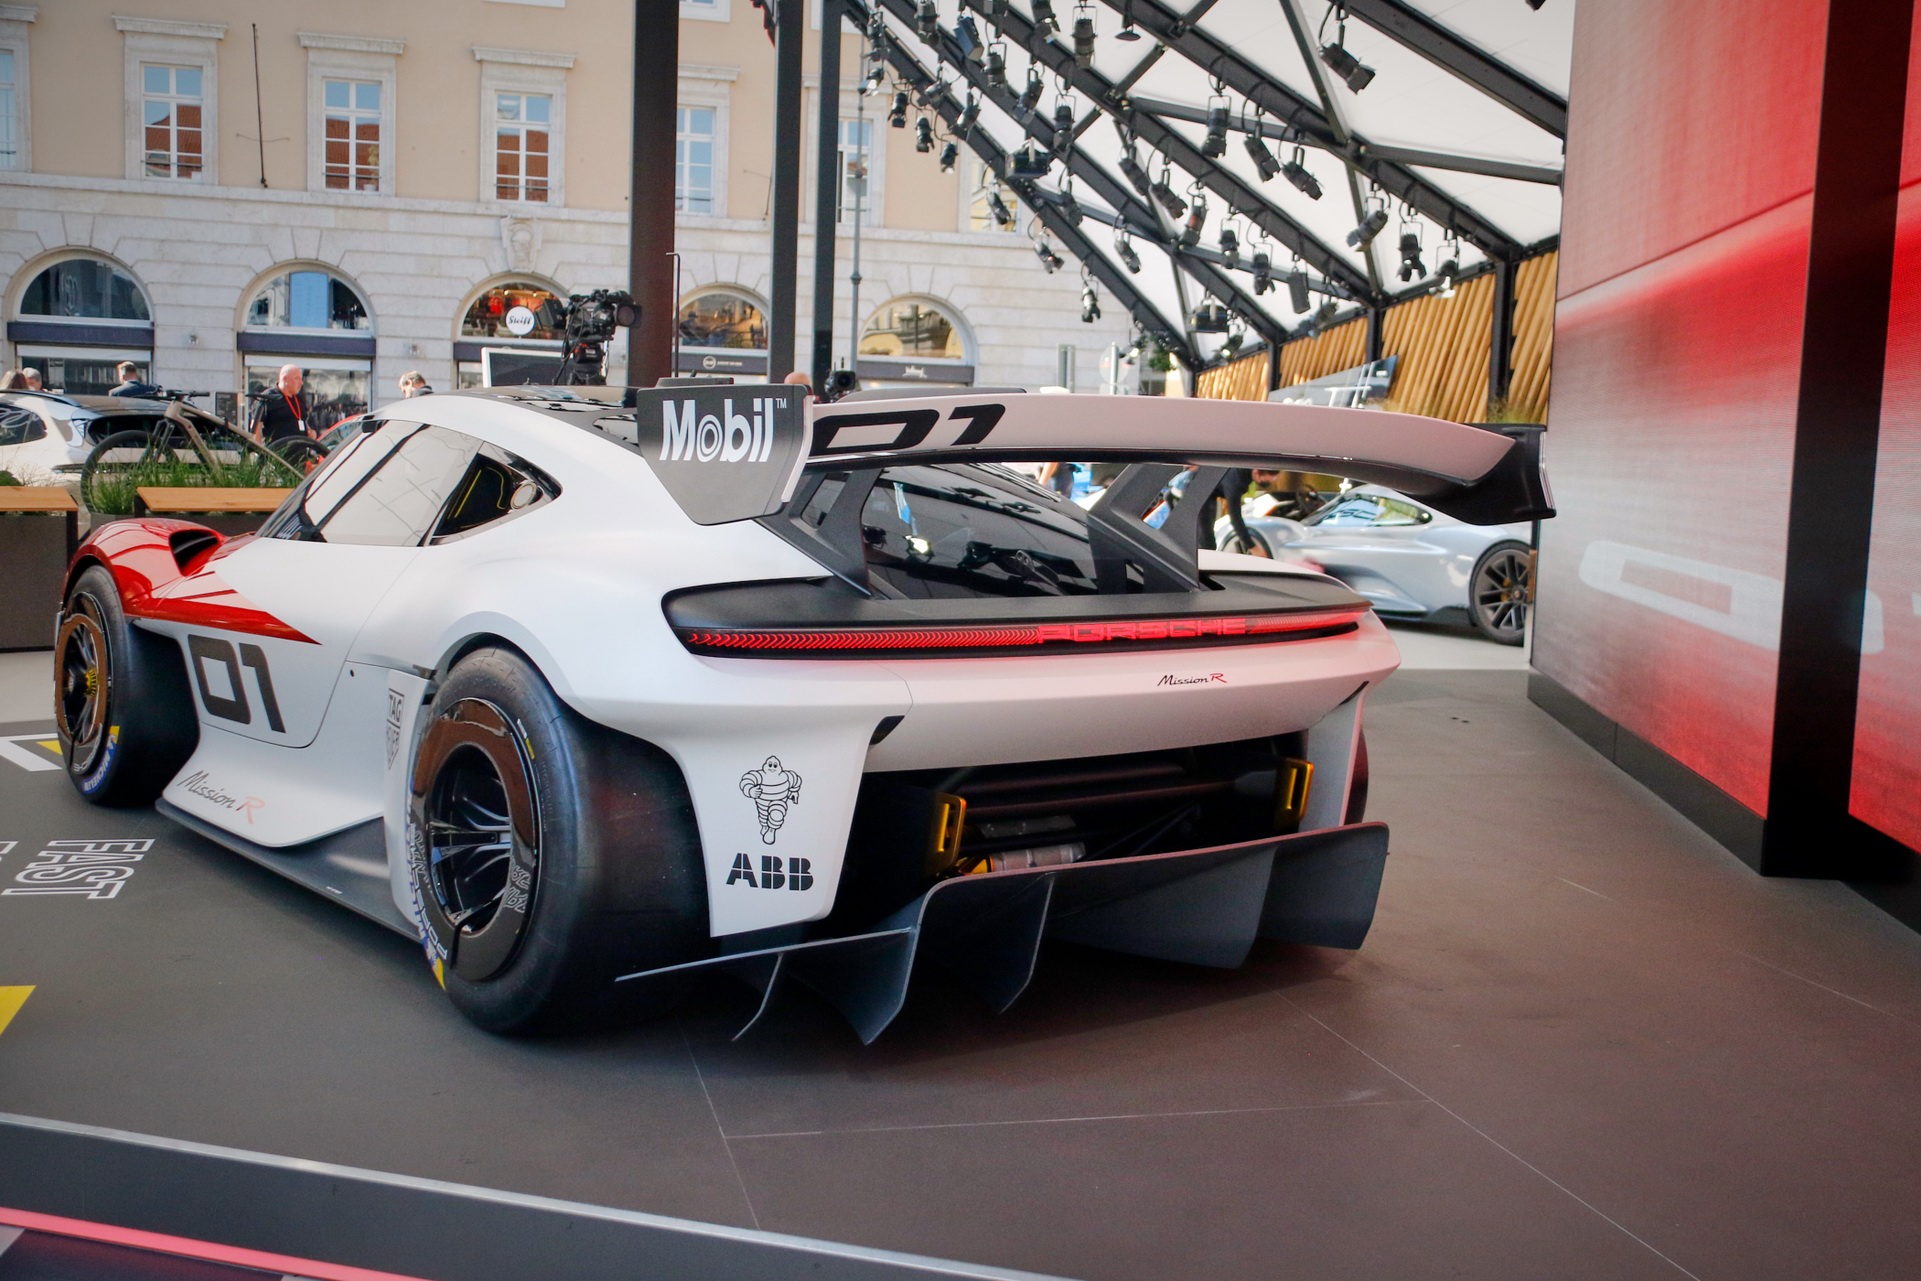 New Porsche Mission R Is A 1,073 HP Electric Racing Car That Hints